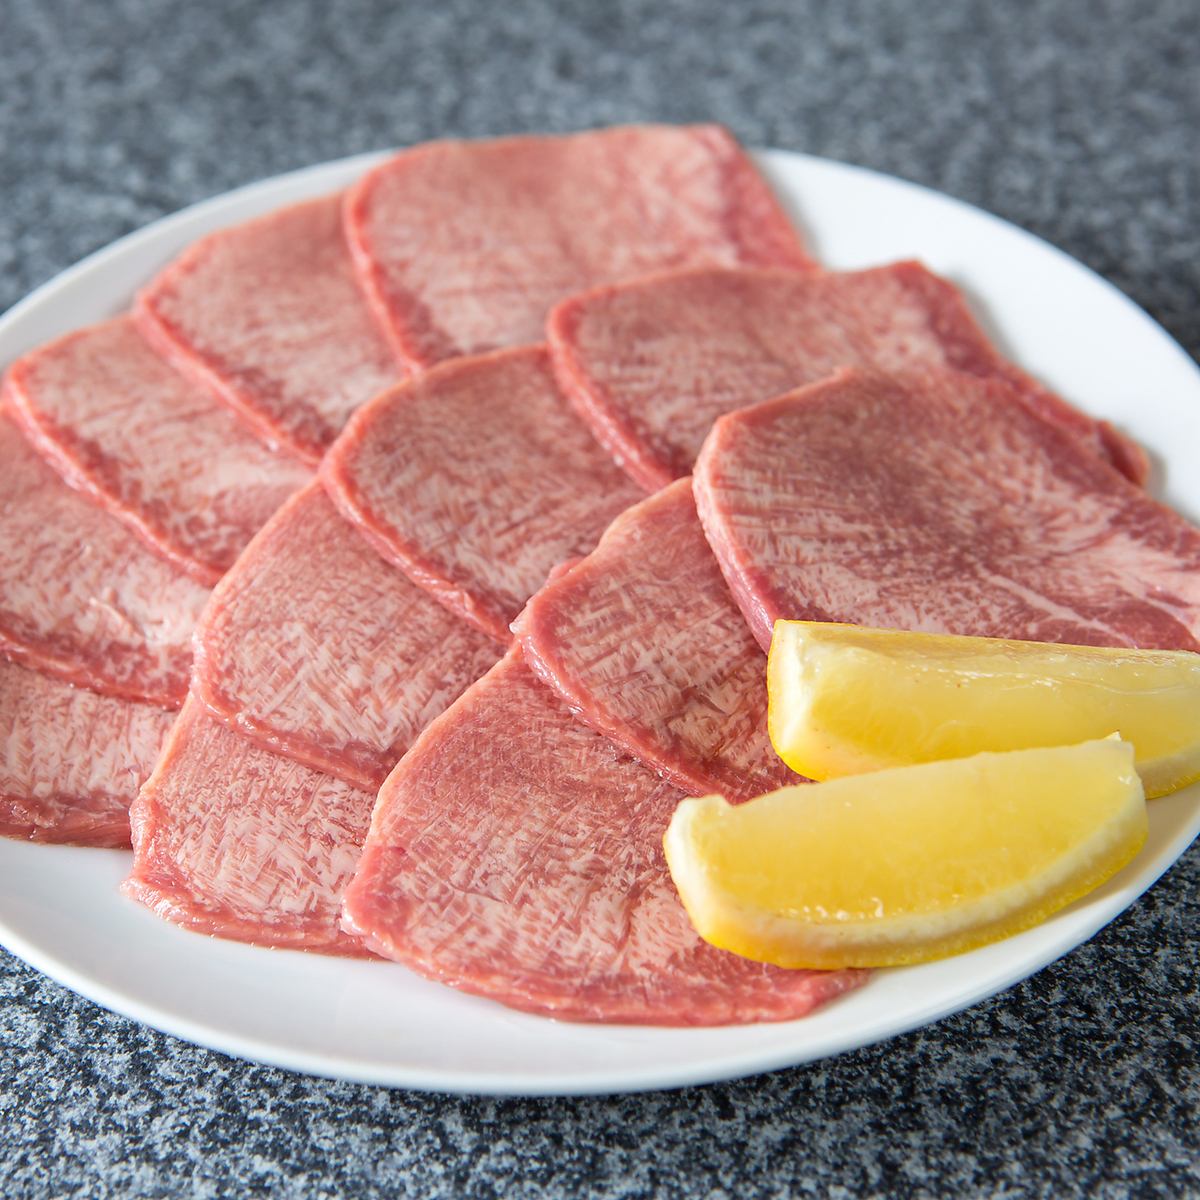 We also offer thick-cut premium salted tongue, which is very popular with our young customers.